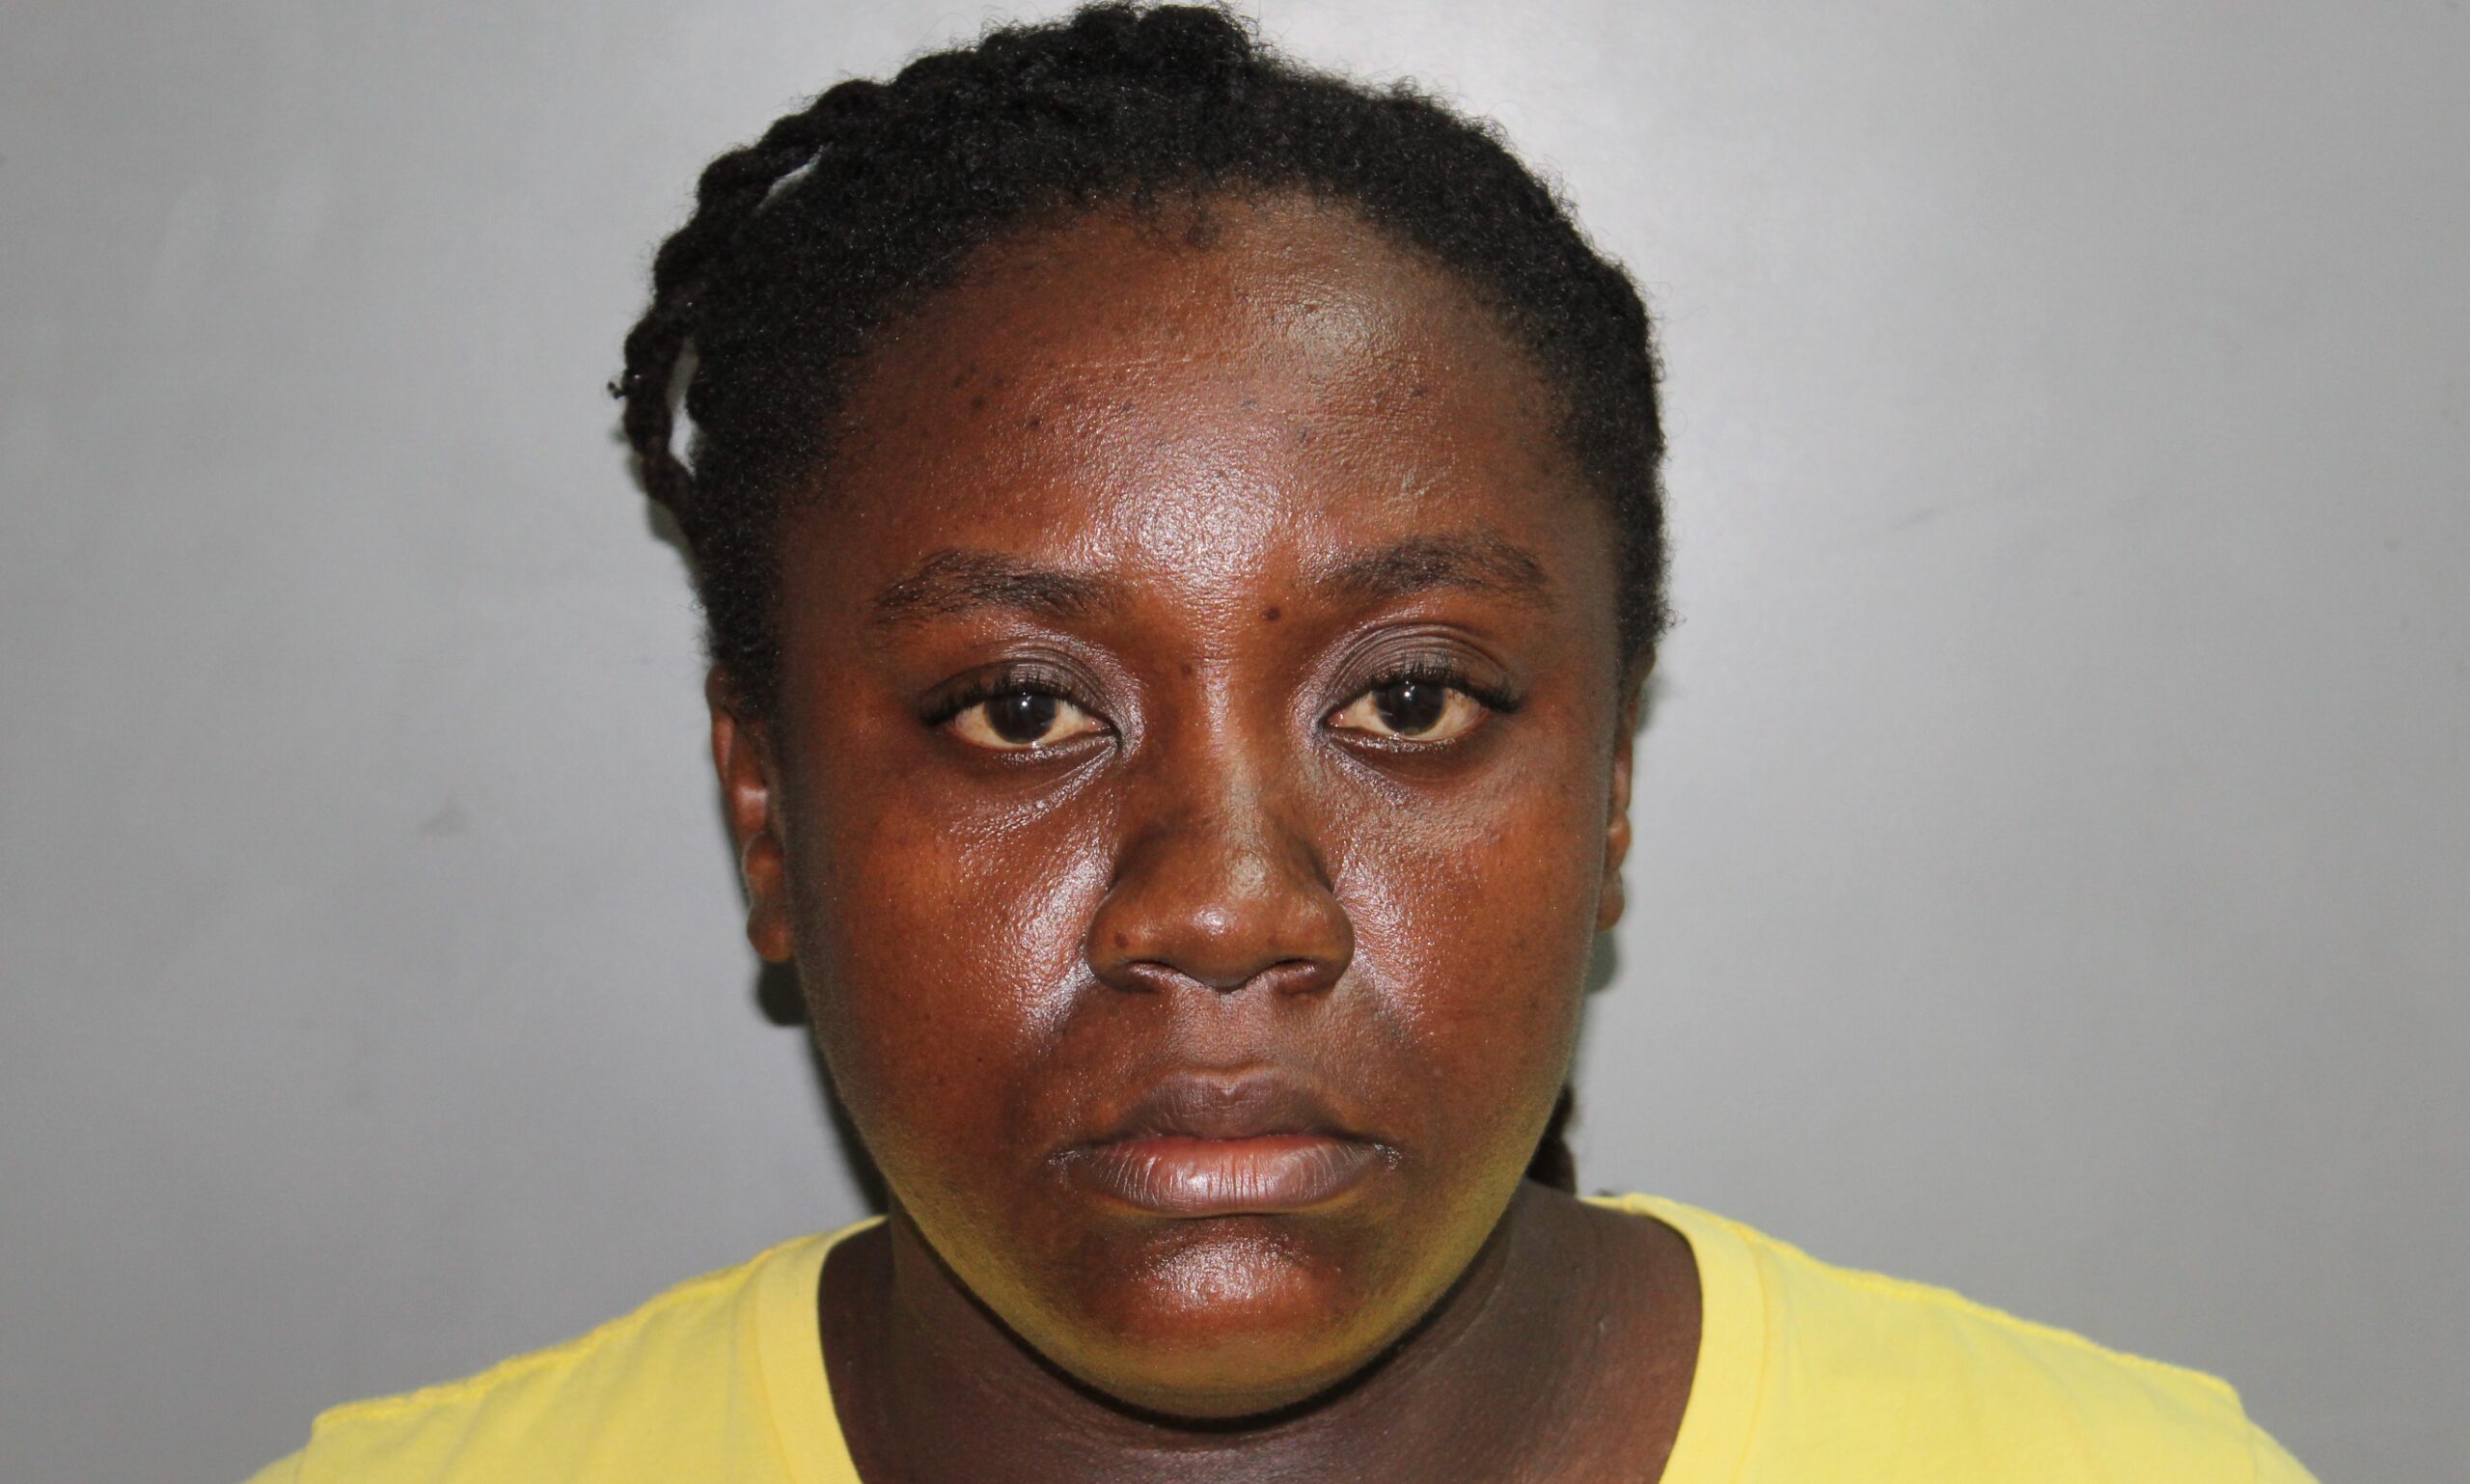 Sion Hill Woman Charged With Using Someone Else's Debit Card 3 Times: VIPD